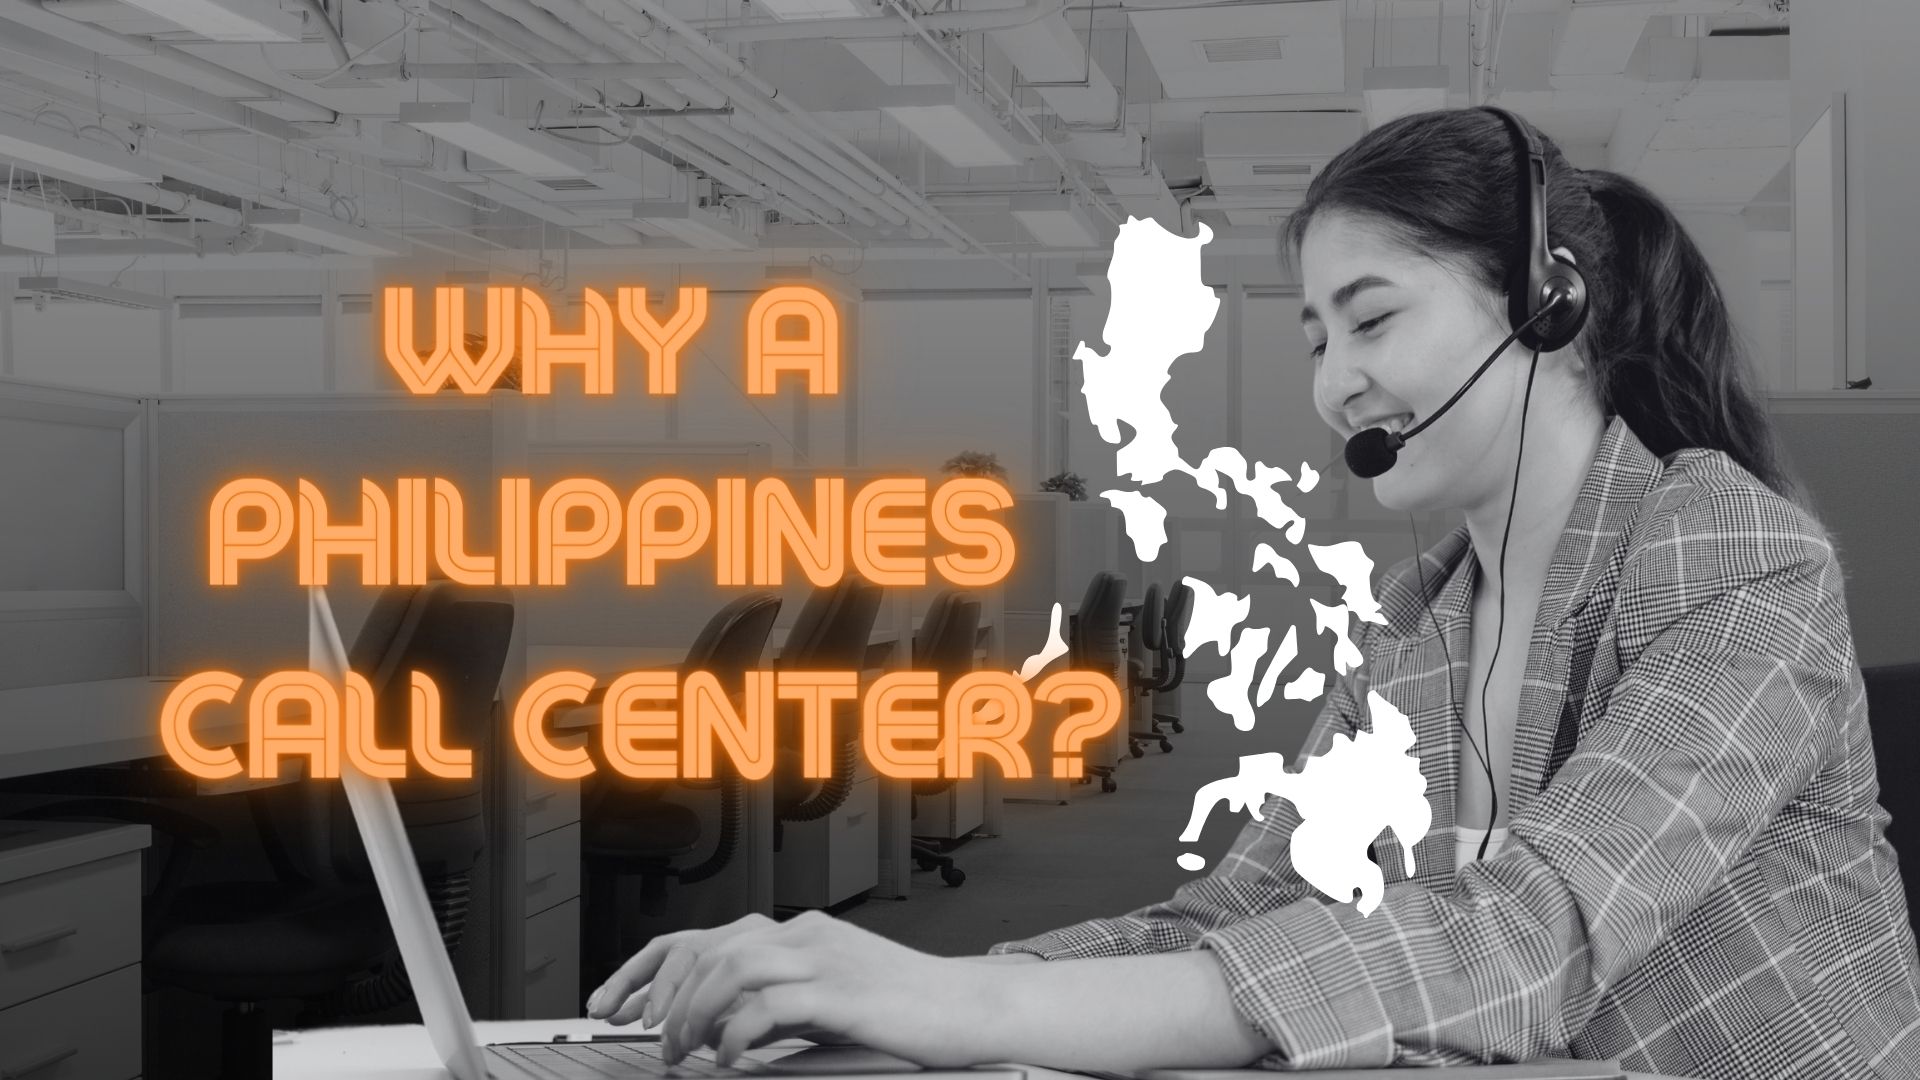 What is the purpose of a call center in the Philippines?